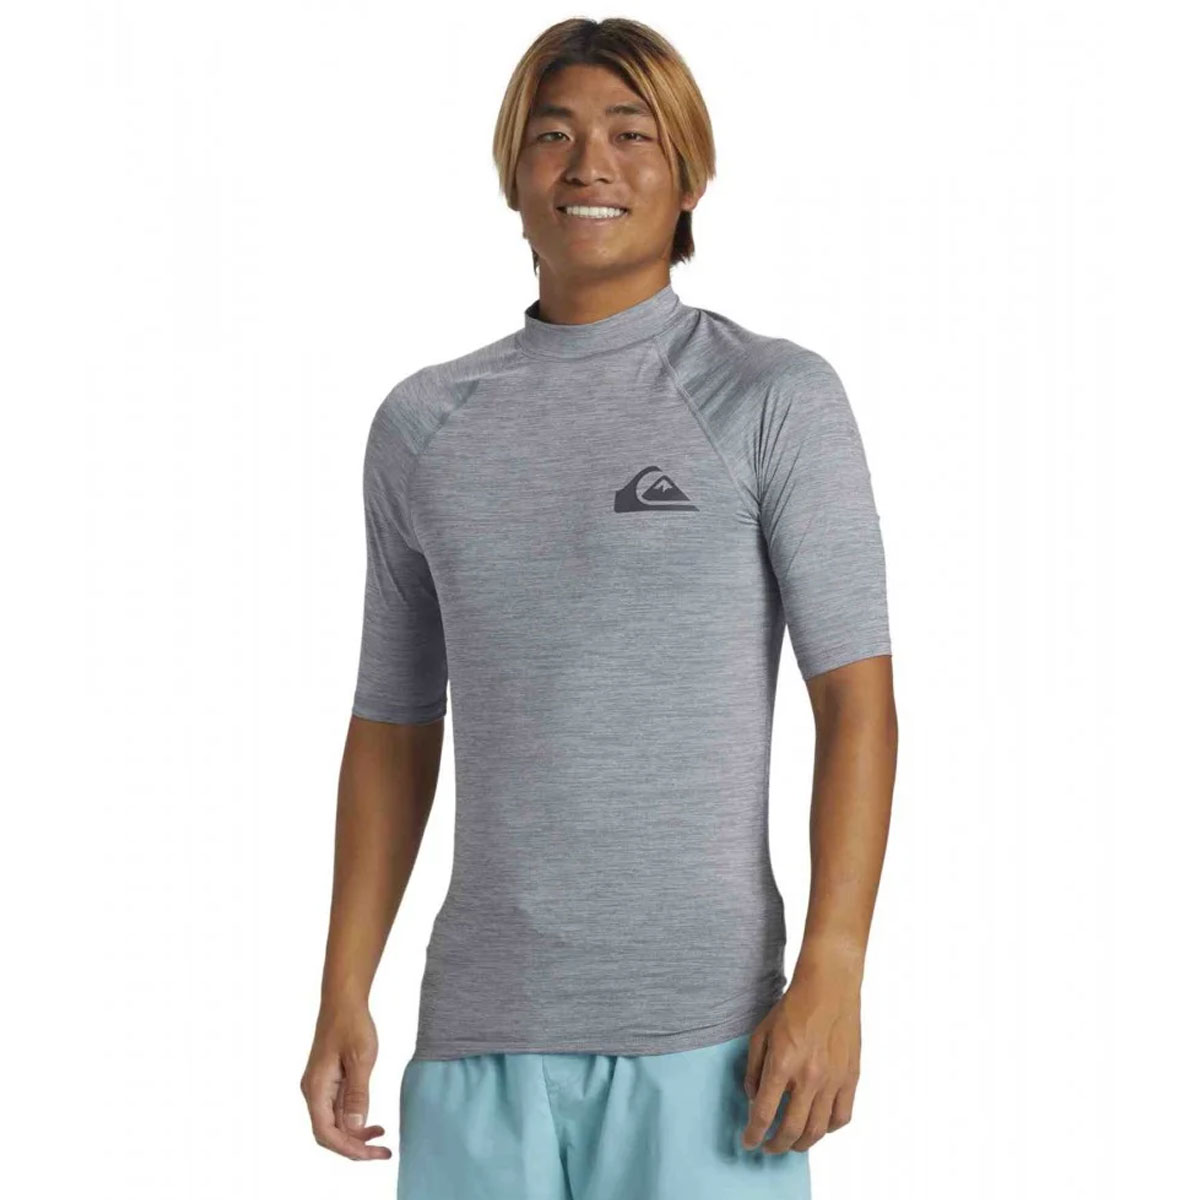 QUIKSILVER - EVERYDAY UPF50 SS WETSUIT